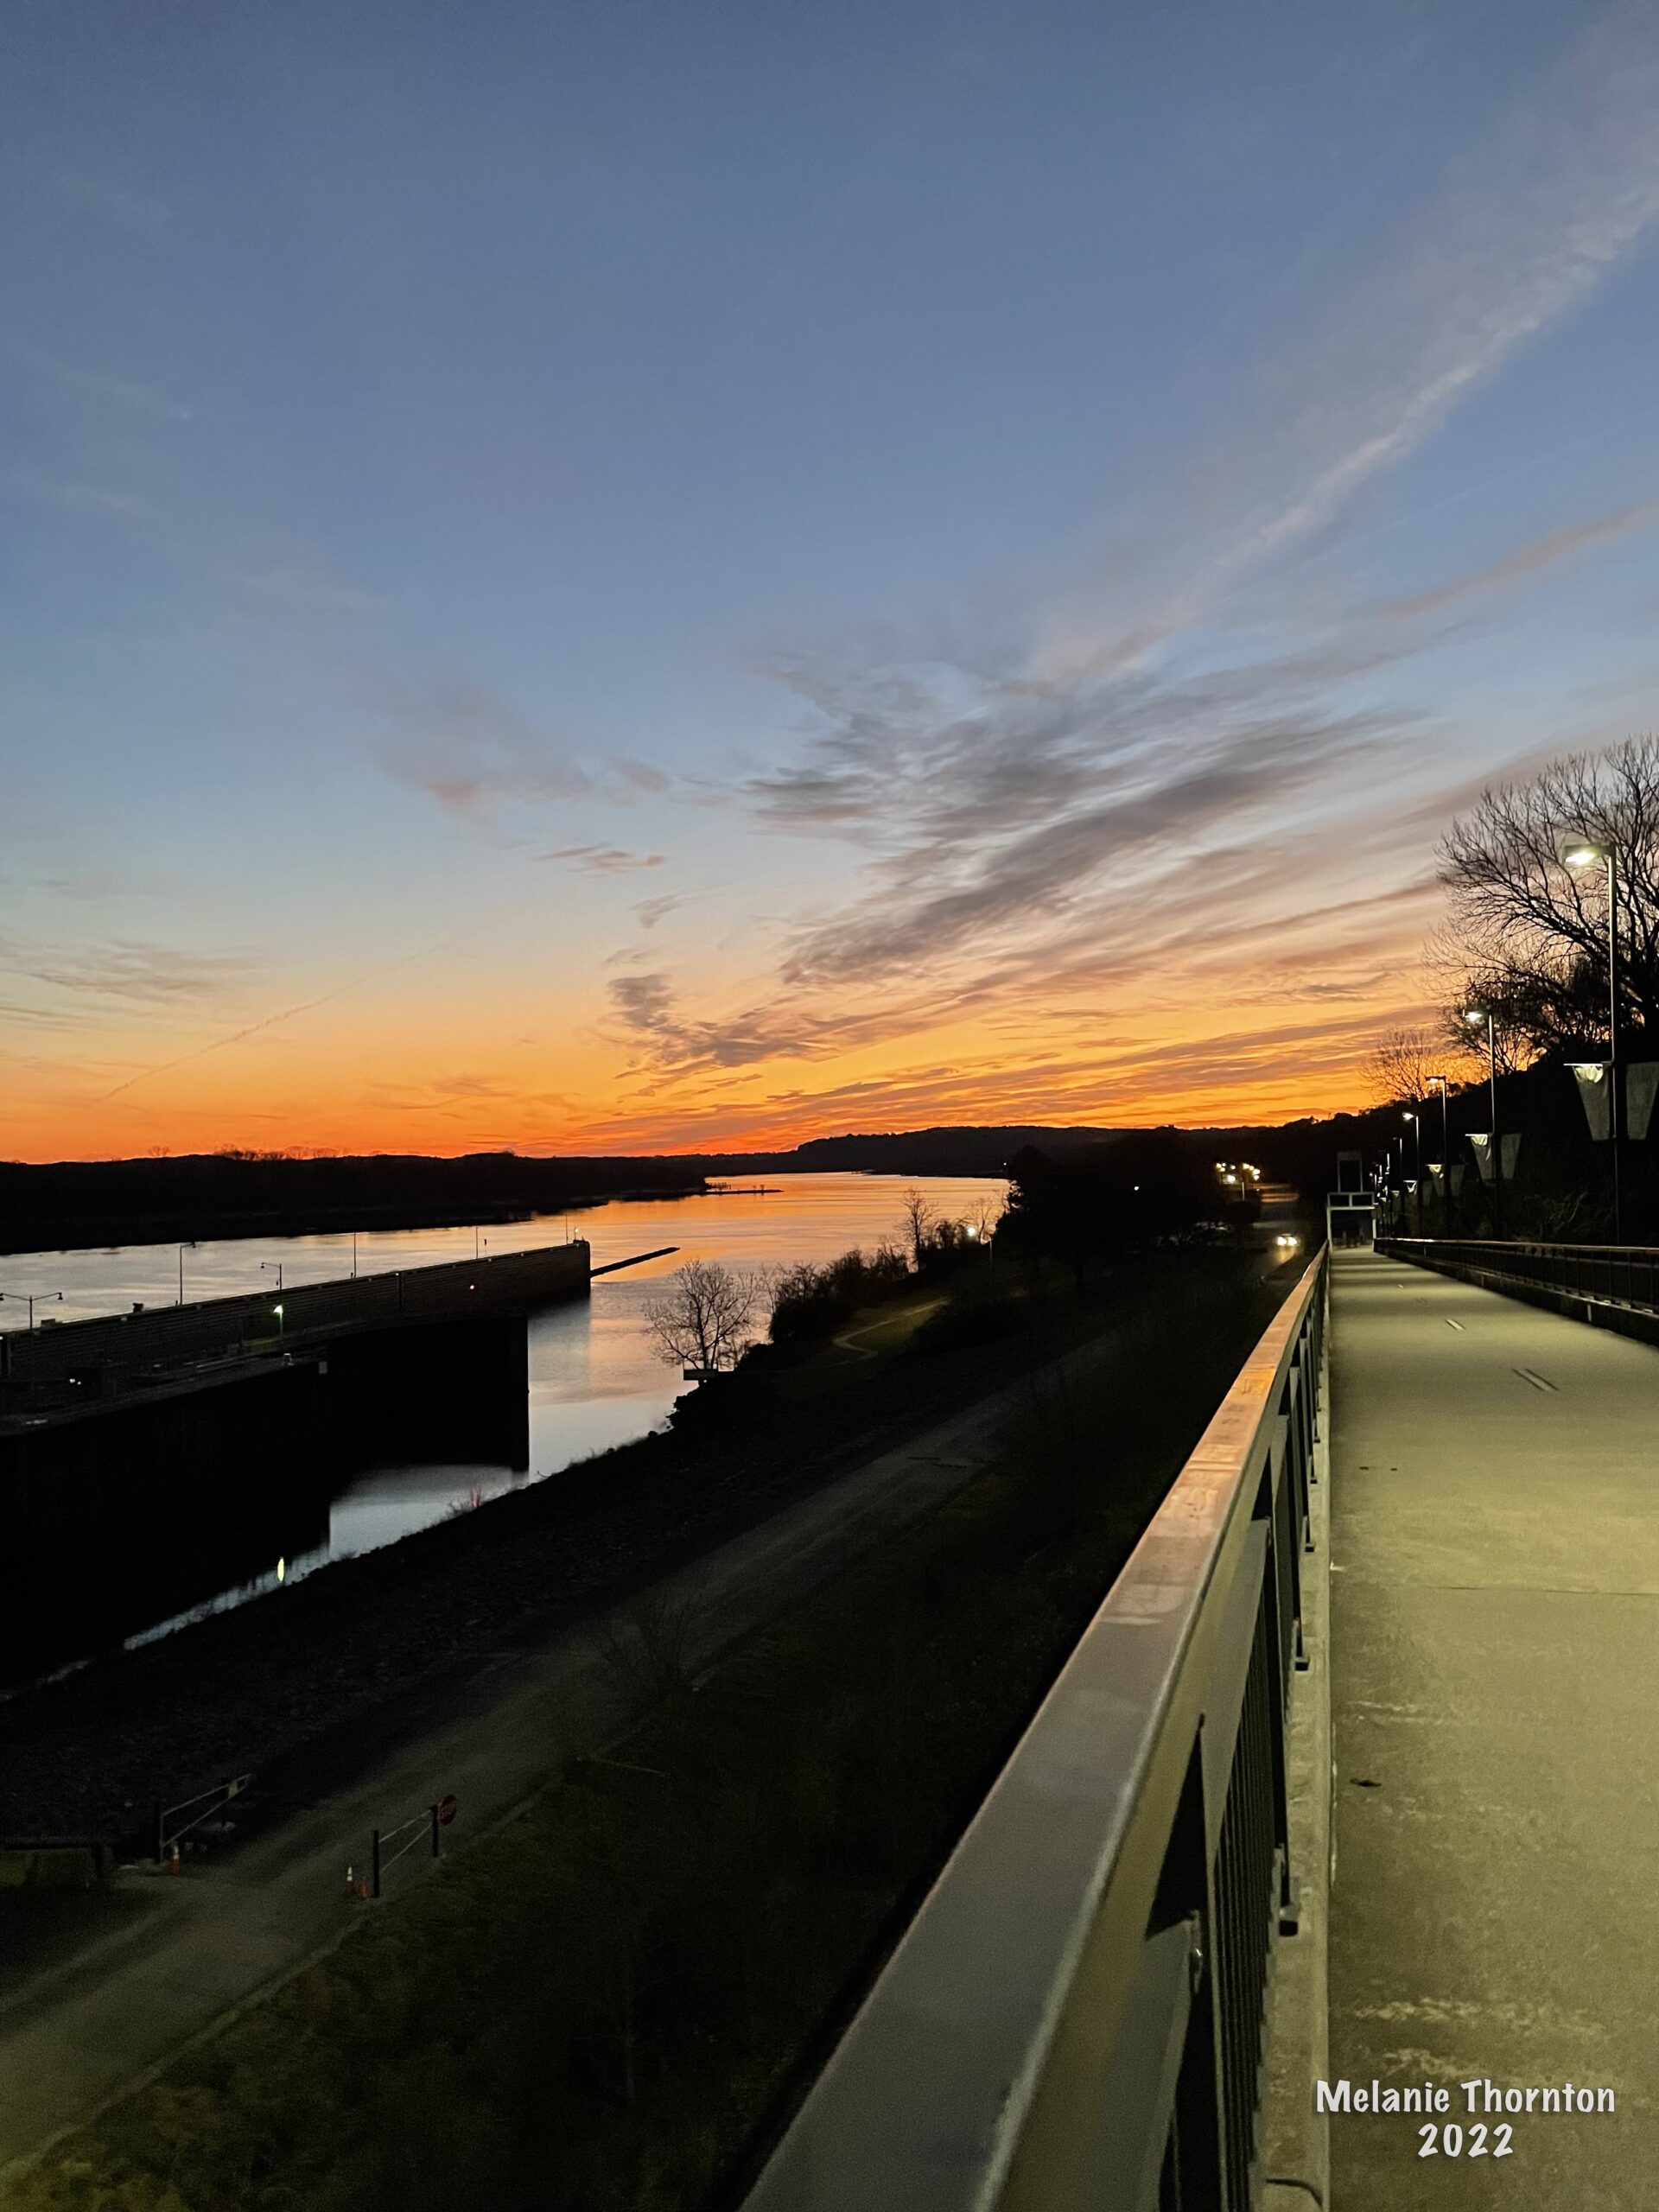 In foreground is a rail and a sidewalk. Looking over the rail is a body of water and a structure in the water. The sky is orange and yellow and blue.